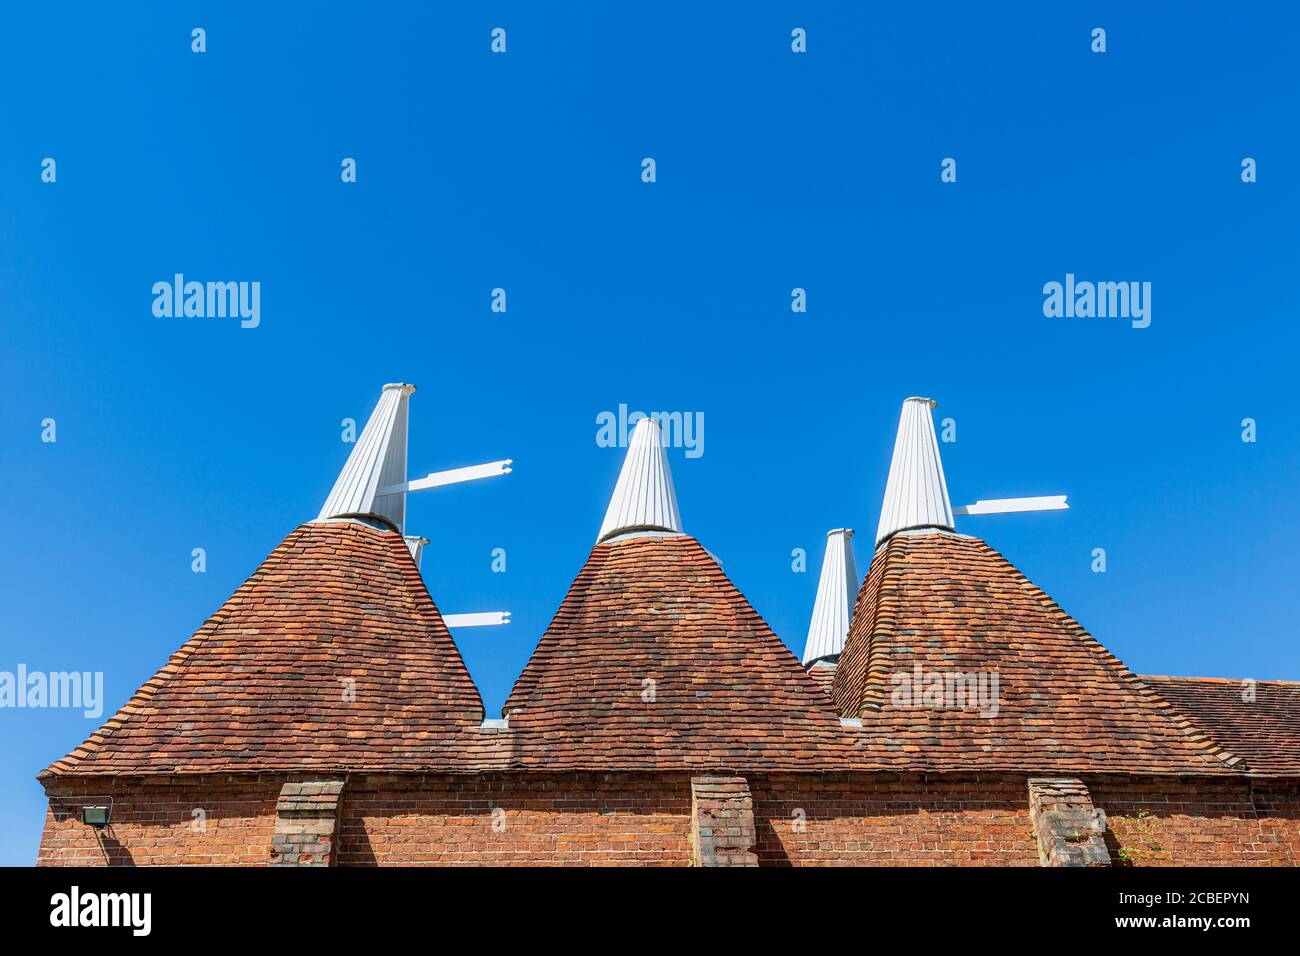 The roof of an Oast house in the Kent countryside, England Stock Photo